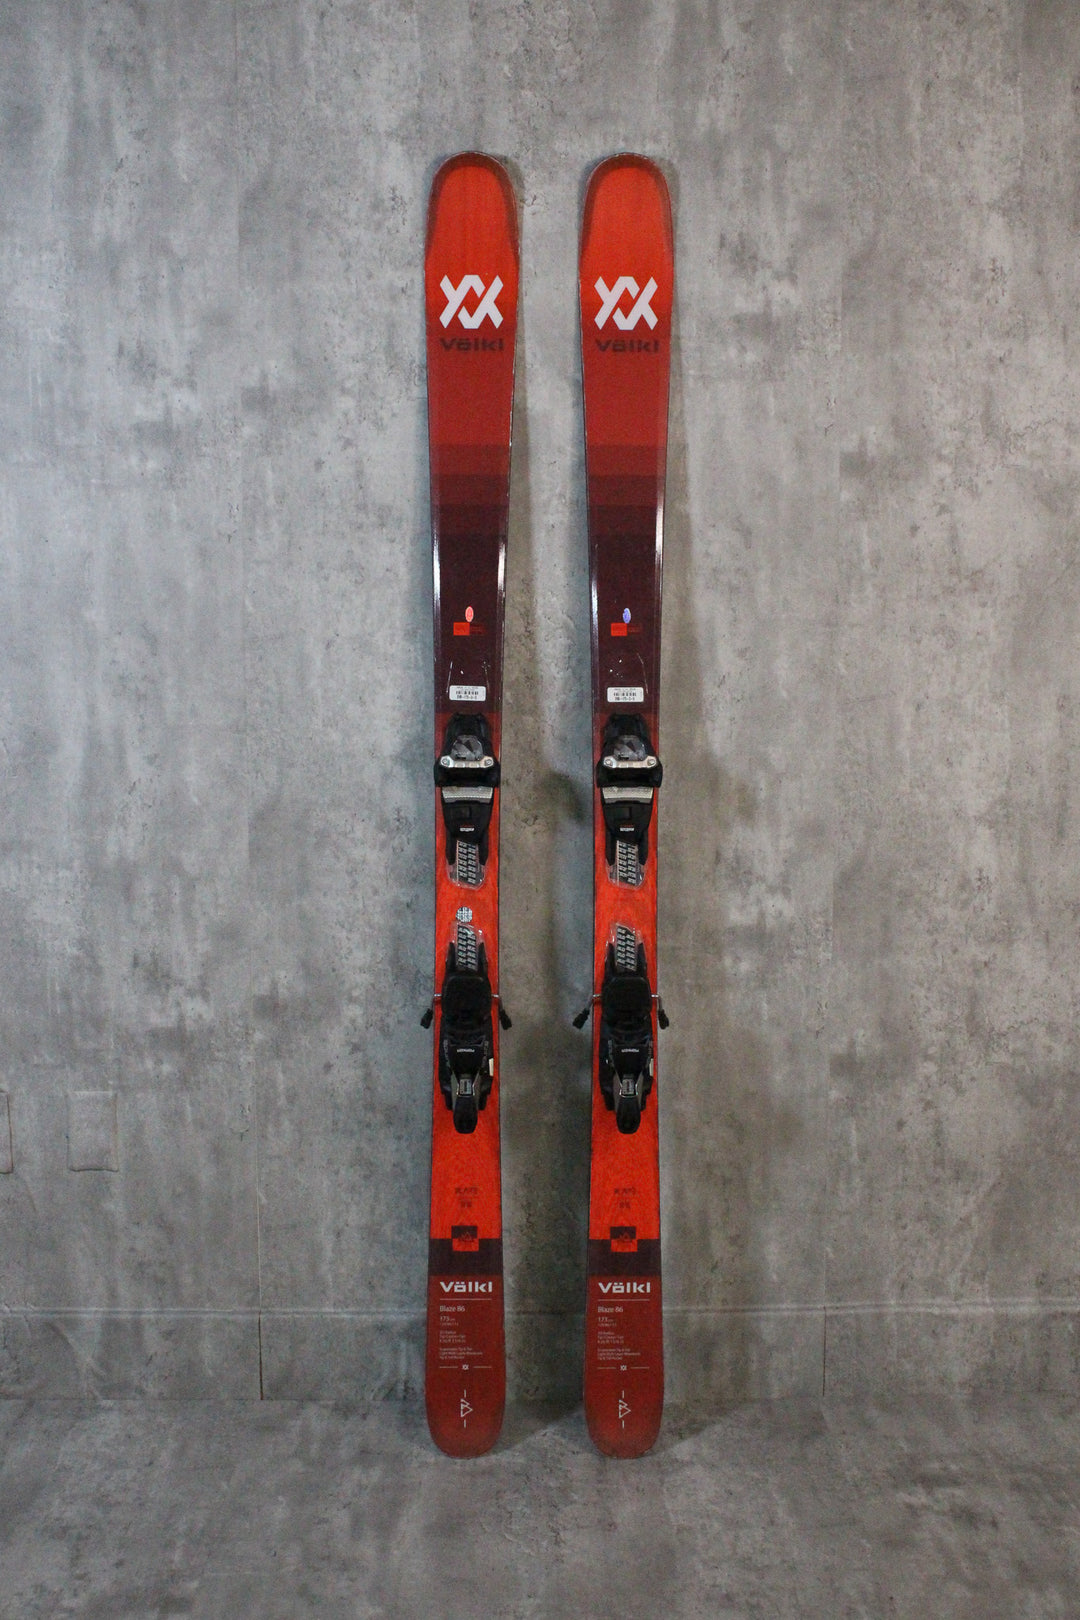 The Blaze 86, with its 86 mm waist, blends smooth performance and light weight. Featuring a full wood core and a 3D radius sidecut, it enhances stability and flotation. Ideal for all-mountain skiing, freeriding, and touring. Available as used skis in Park City.